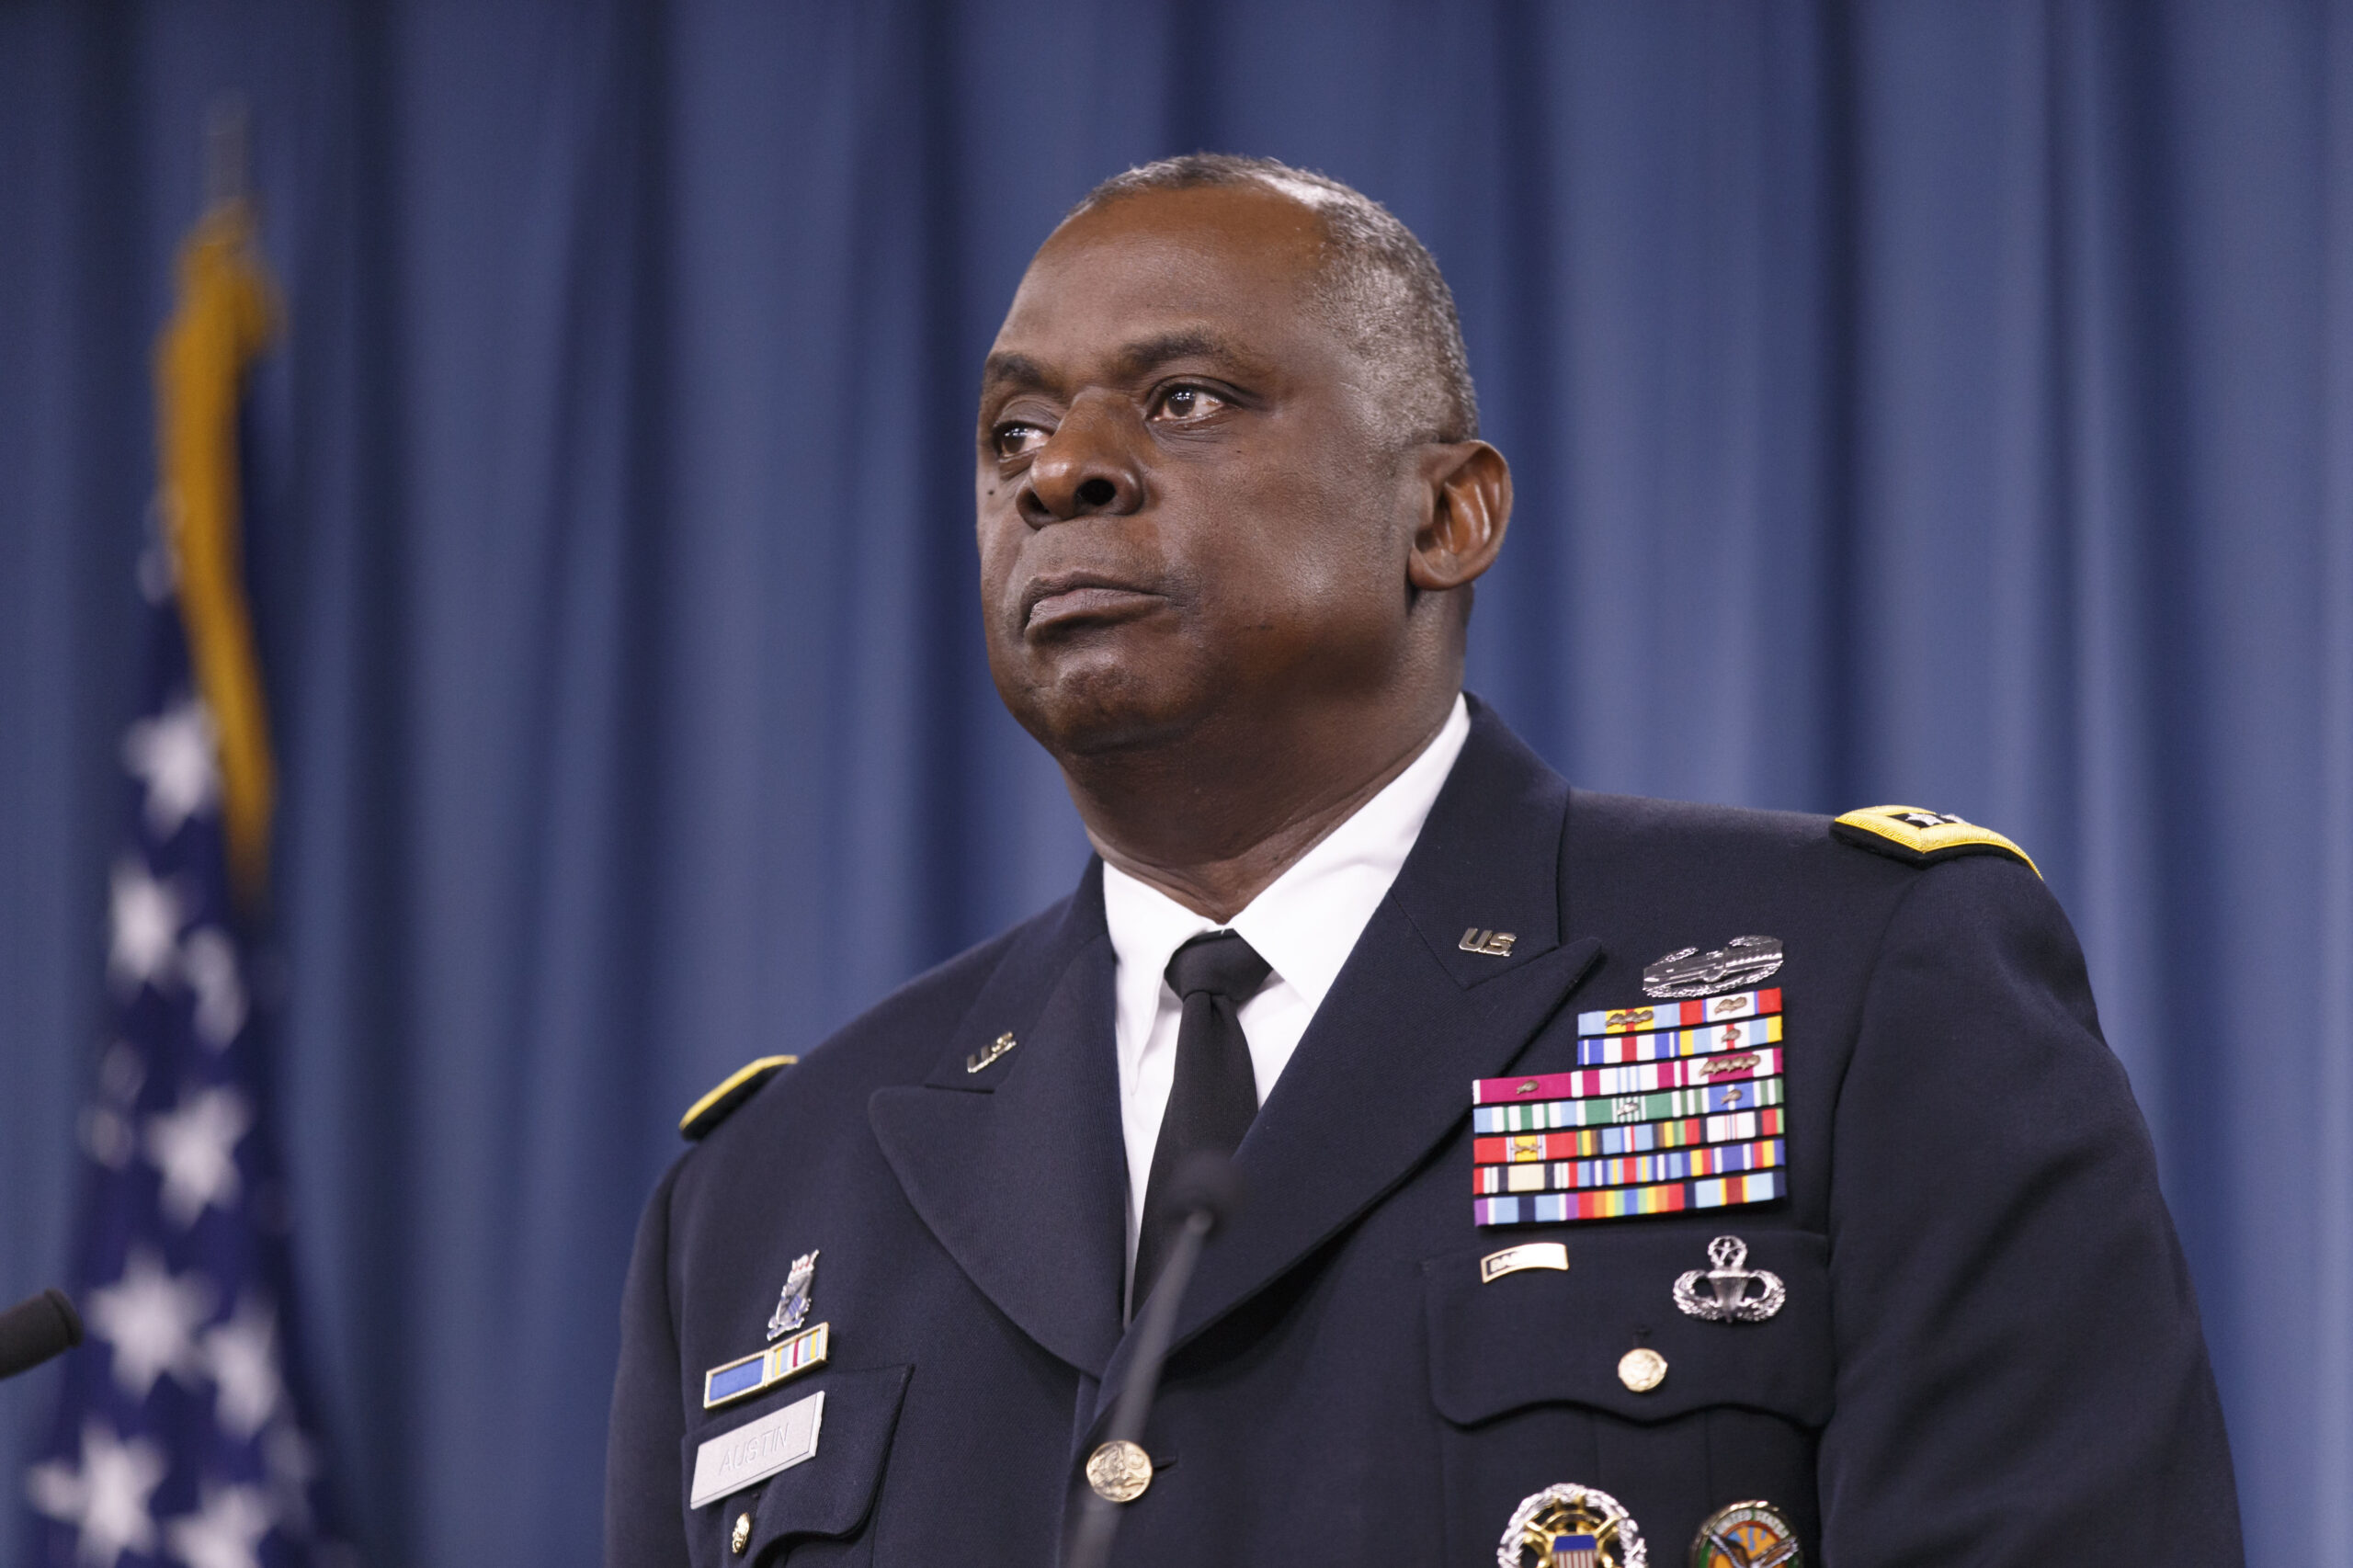 Army Gen. Lloyd J. Austin III, commander of U.S. Central Command, updates reporters at the Pentagon about the military campaign against Islamic State militants in Iraq, Friday, Oct. 17, 2014. The U.S. Central Command is in charge of military operations in the Middle East, North Africa, and Central Asia, most notably Afghanistan and Iraq.  (AP Photo/J. Scott Applewhite)